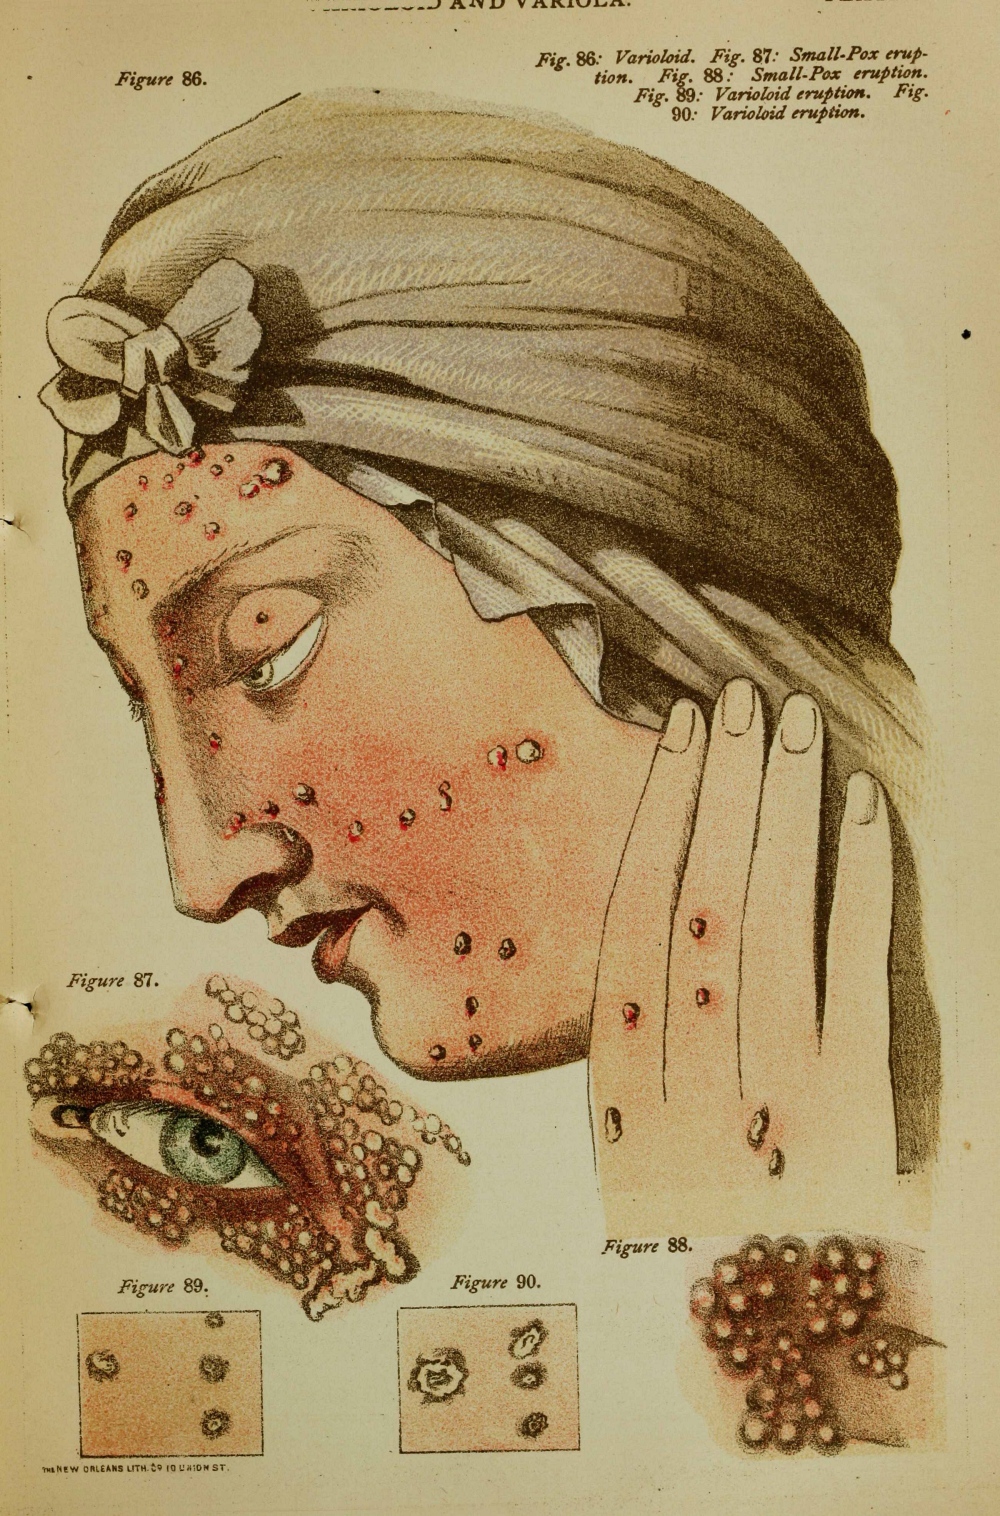 19th century medical illustration of different types of pox